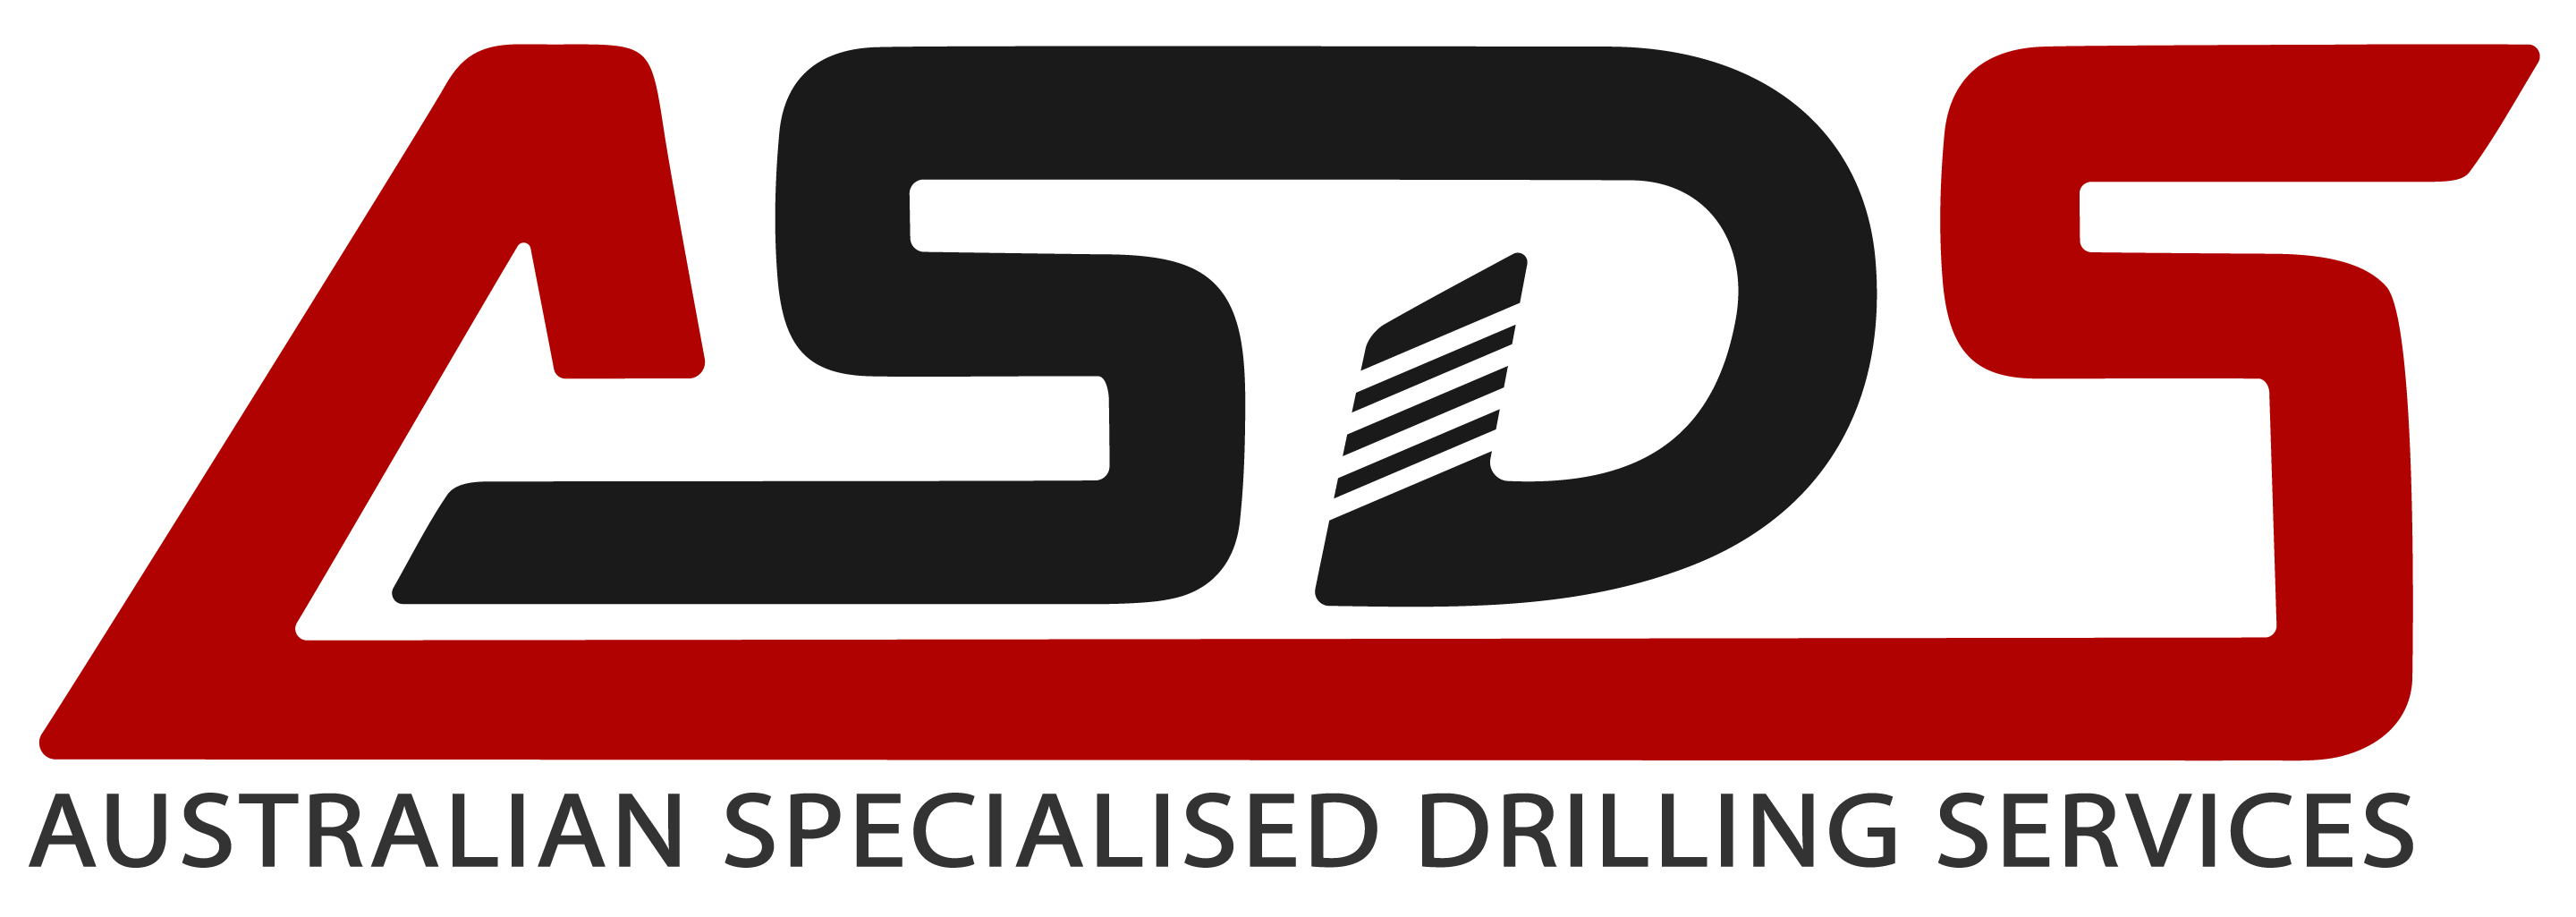 Australian Specialised Drilling Services